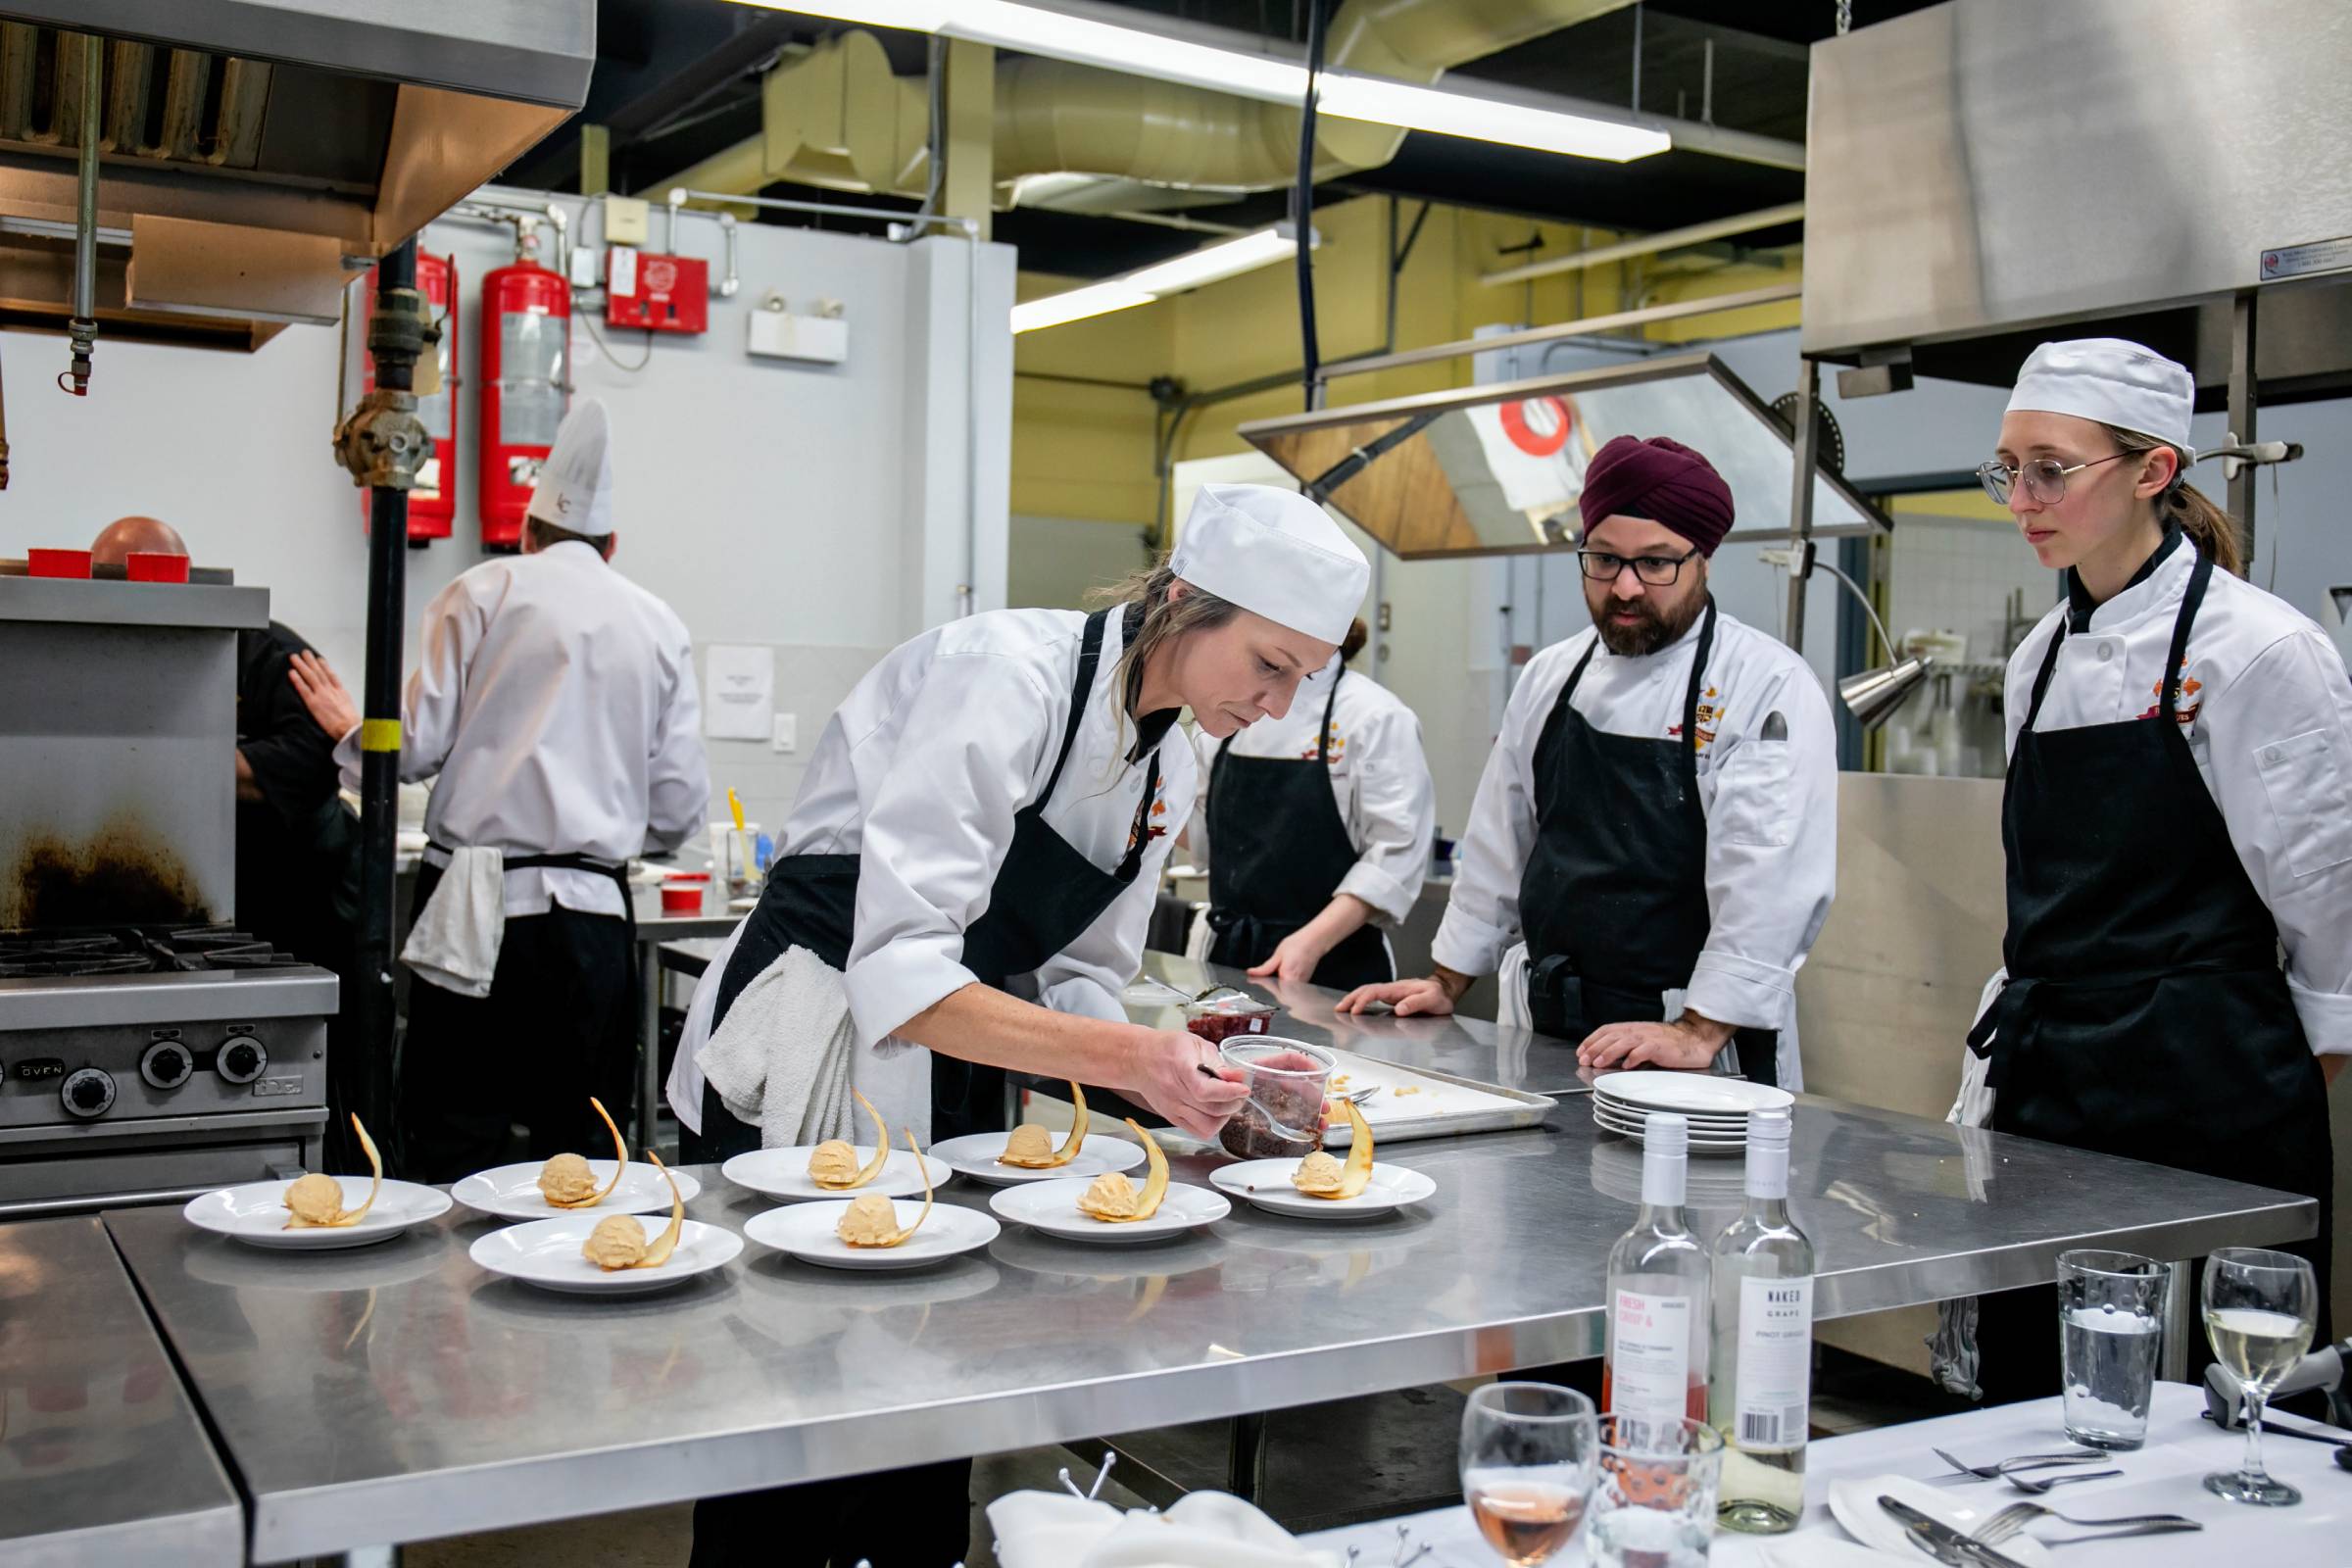 Comparing Culinary Colleges - Image 11 - Top Toques Institute of Culinary Excellence